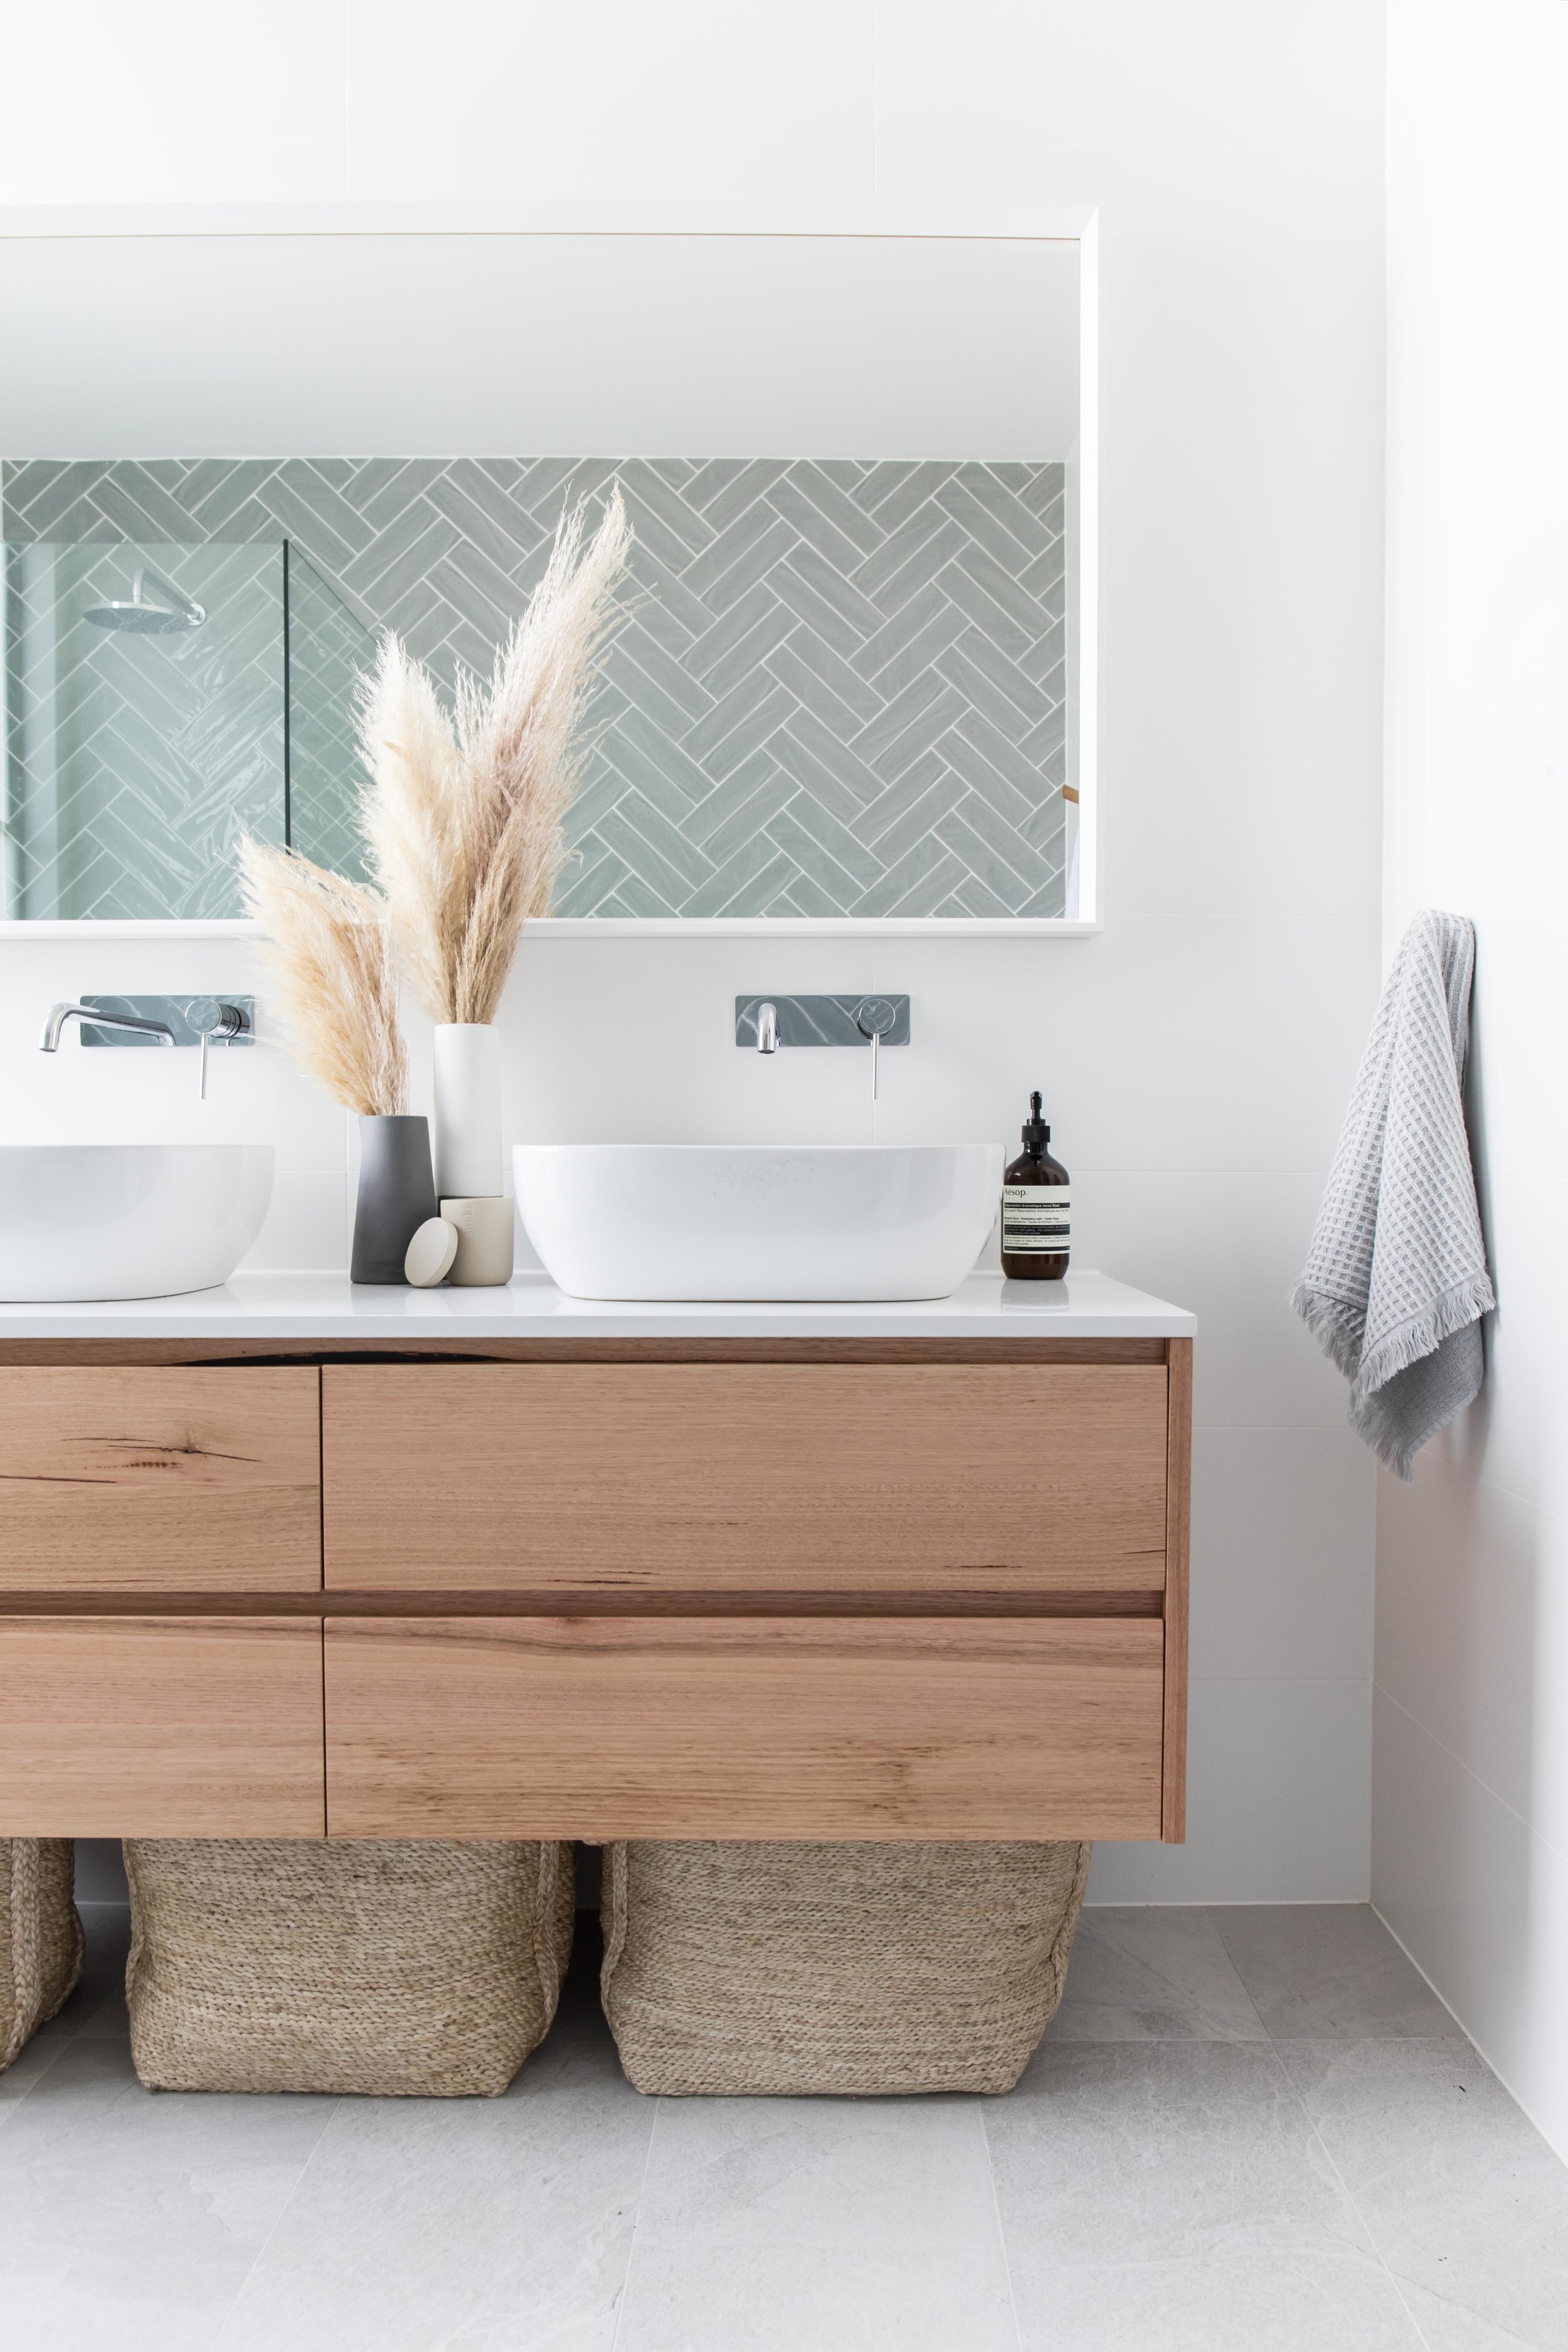 How To Choose Your Vanity, Best Finish For Timber Bathroom Vanity